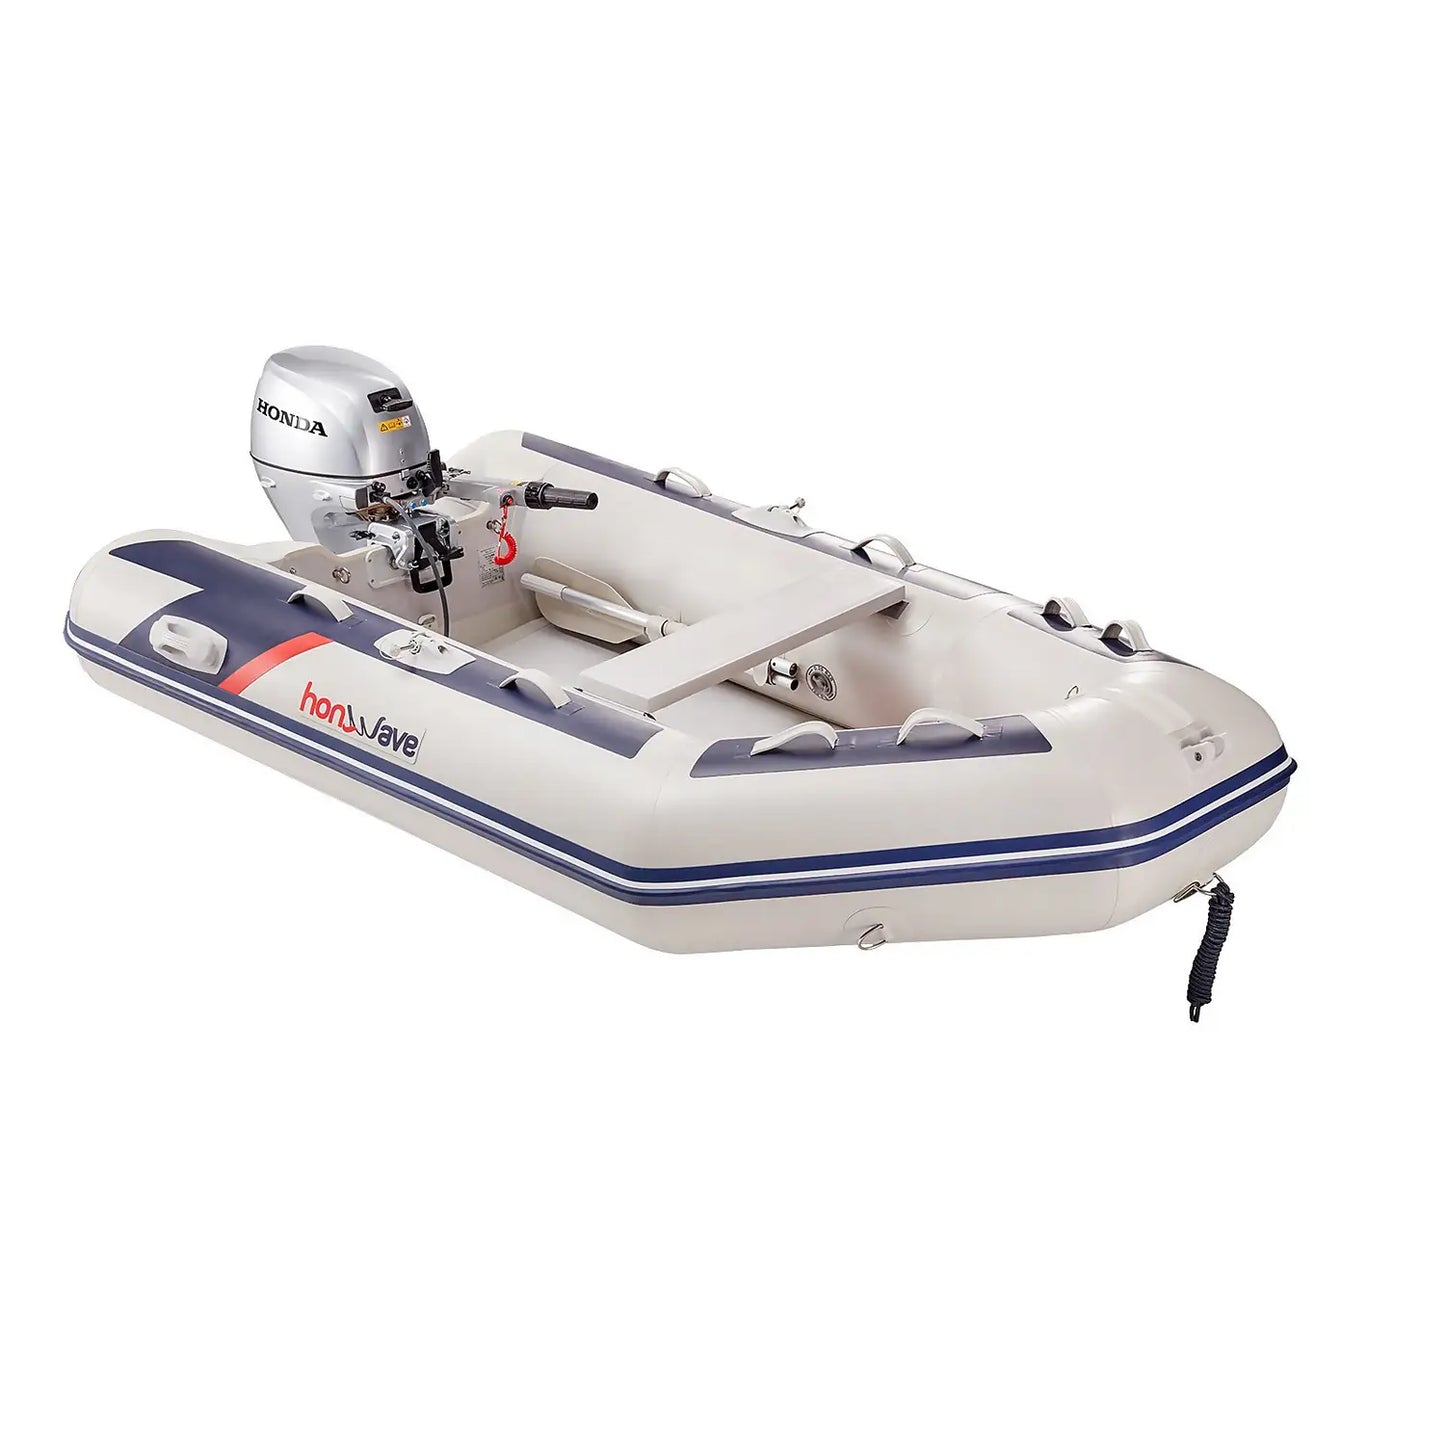 Honwave Package T27IE3 2.7m Inflatable Boat Dinghy Air V-Floor & Honda Bf5 5hp Outboard Engine